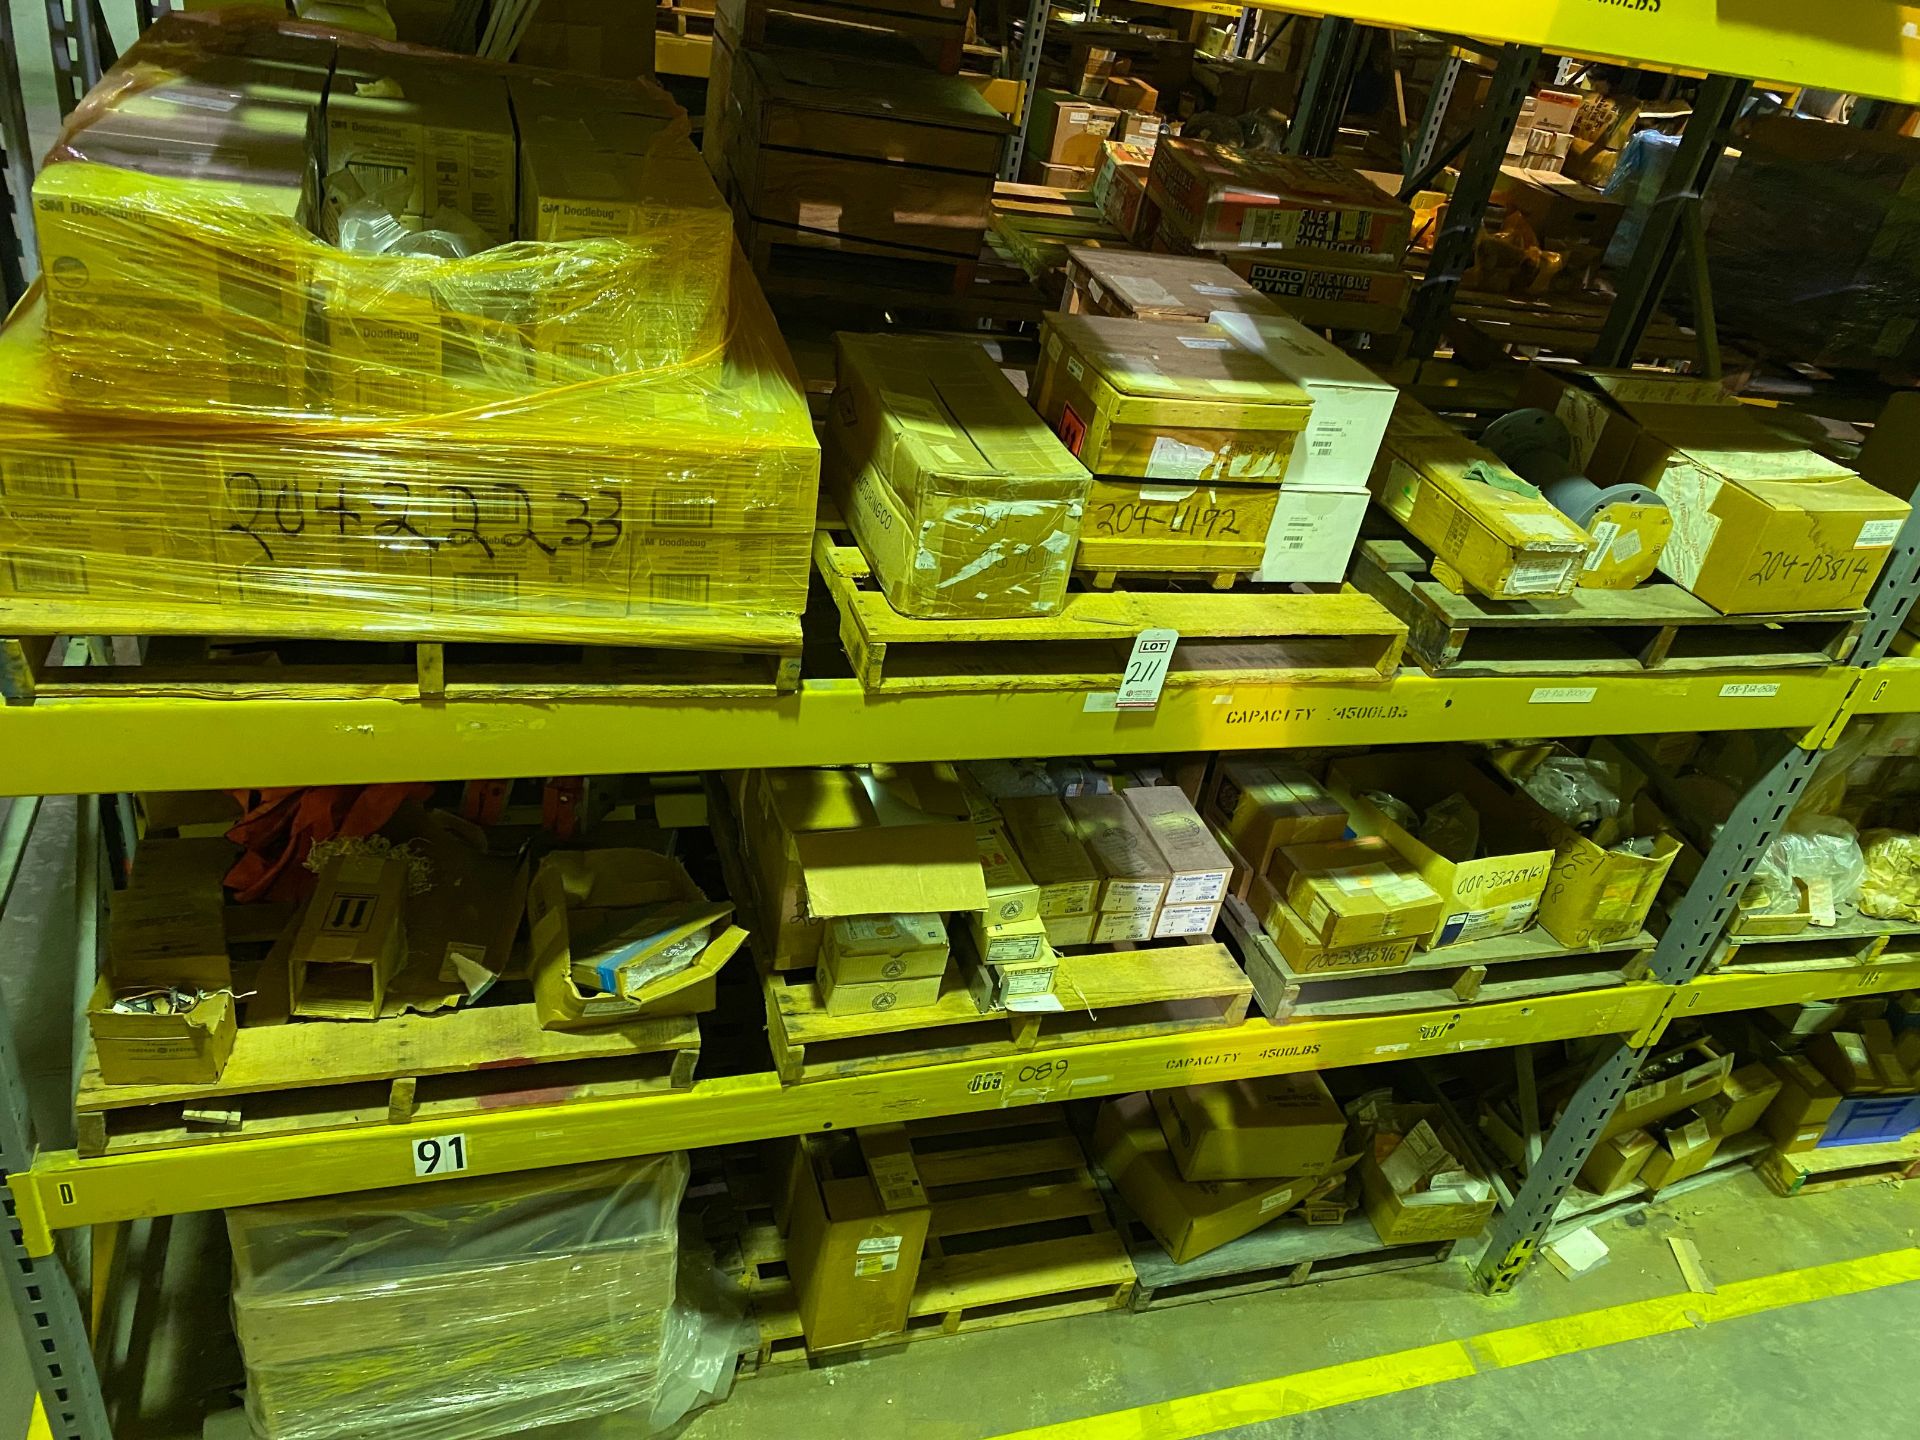 (15) PALLETS OF MAINTENANCE & REPAIR PARTS ON THE FLOOR AND (4) PALLET RACK SHELVES (NO SHELVING)